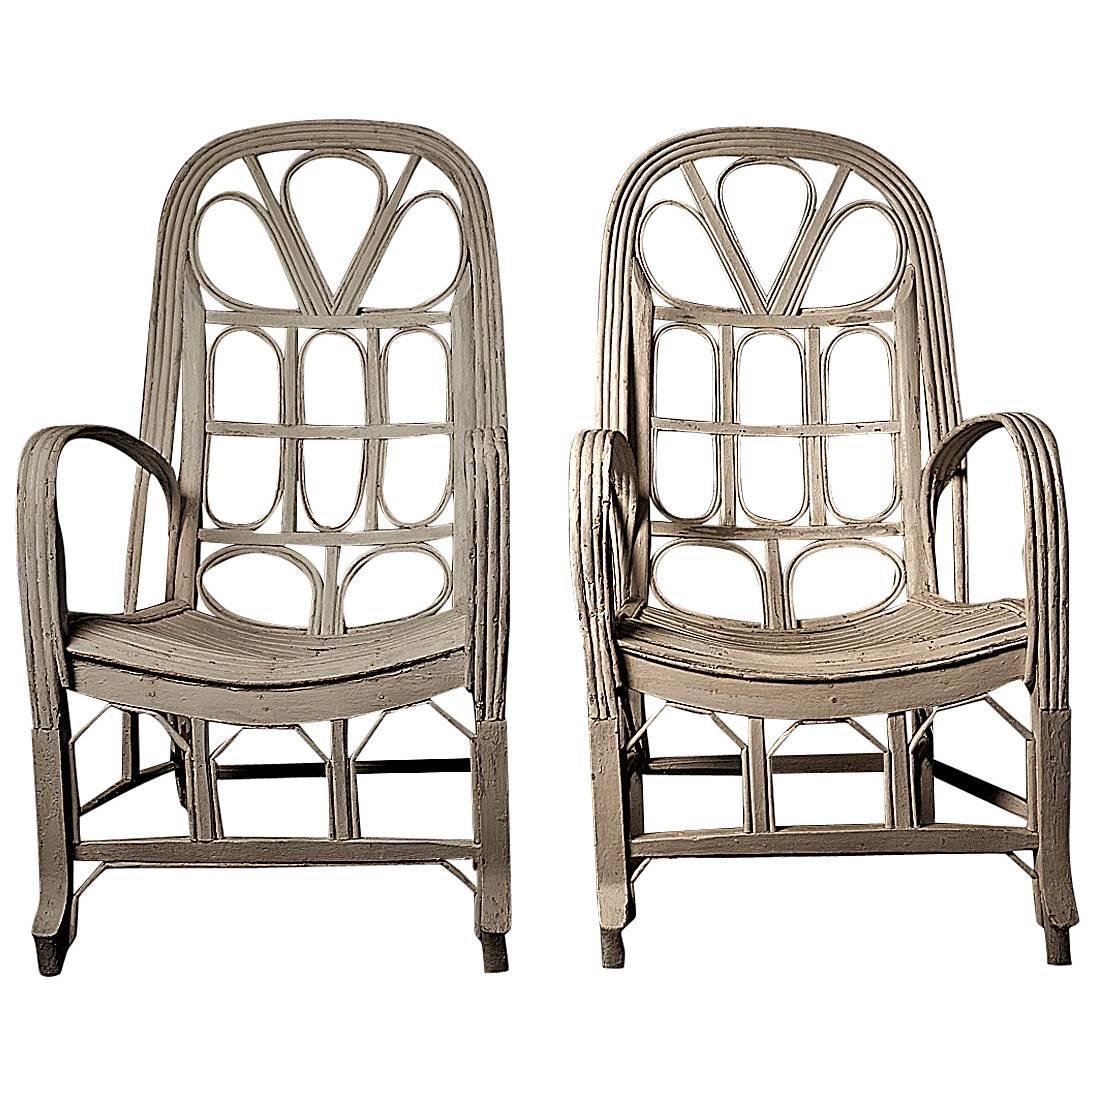 Pair of Large Elegant White Cane Conservatoire Chairs, France, 20th Century